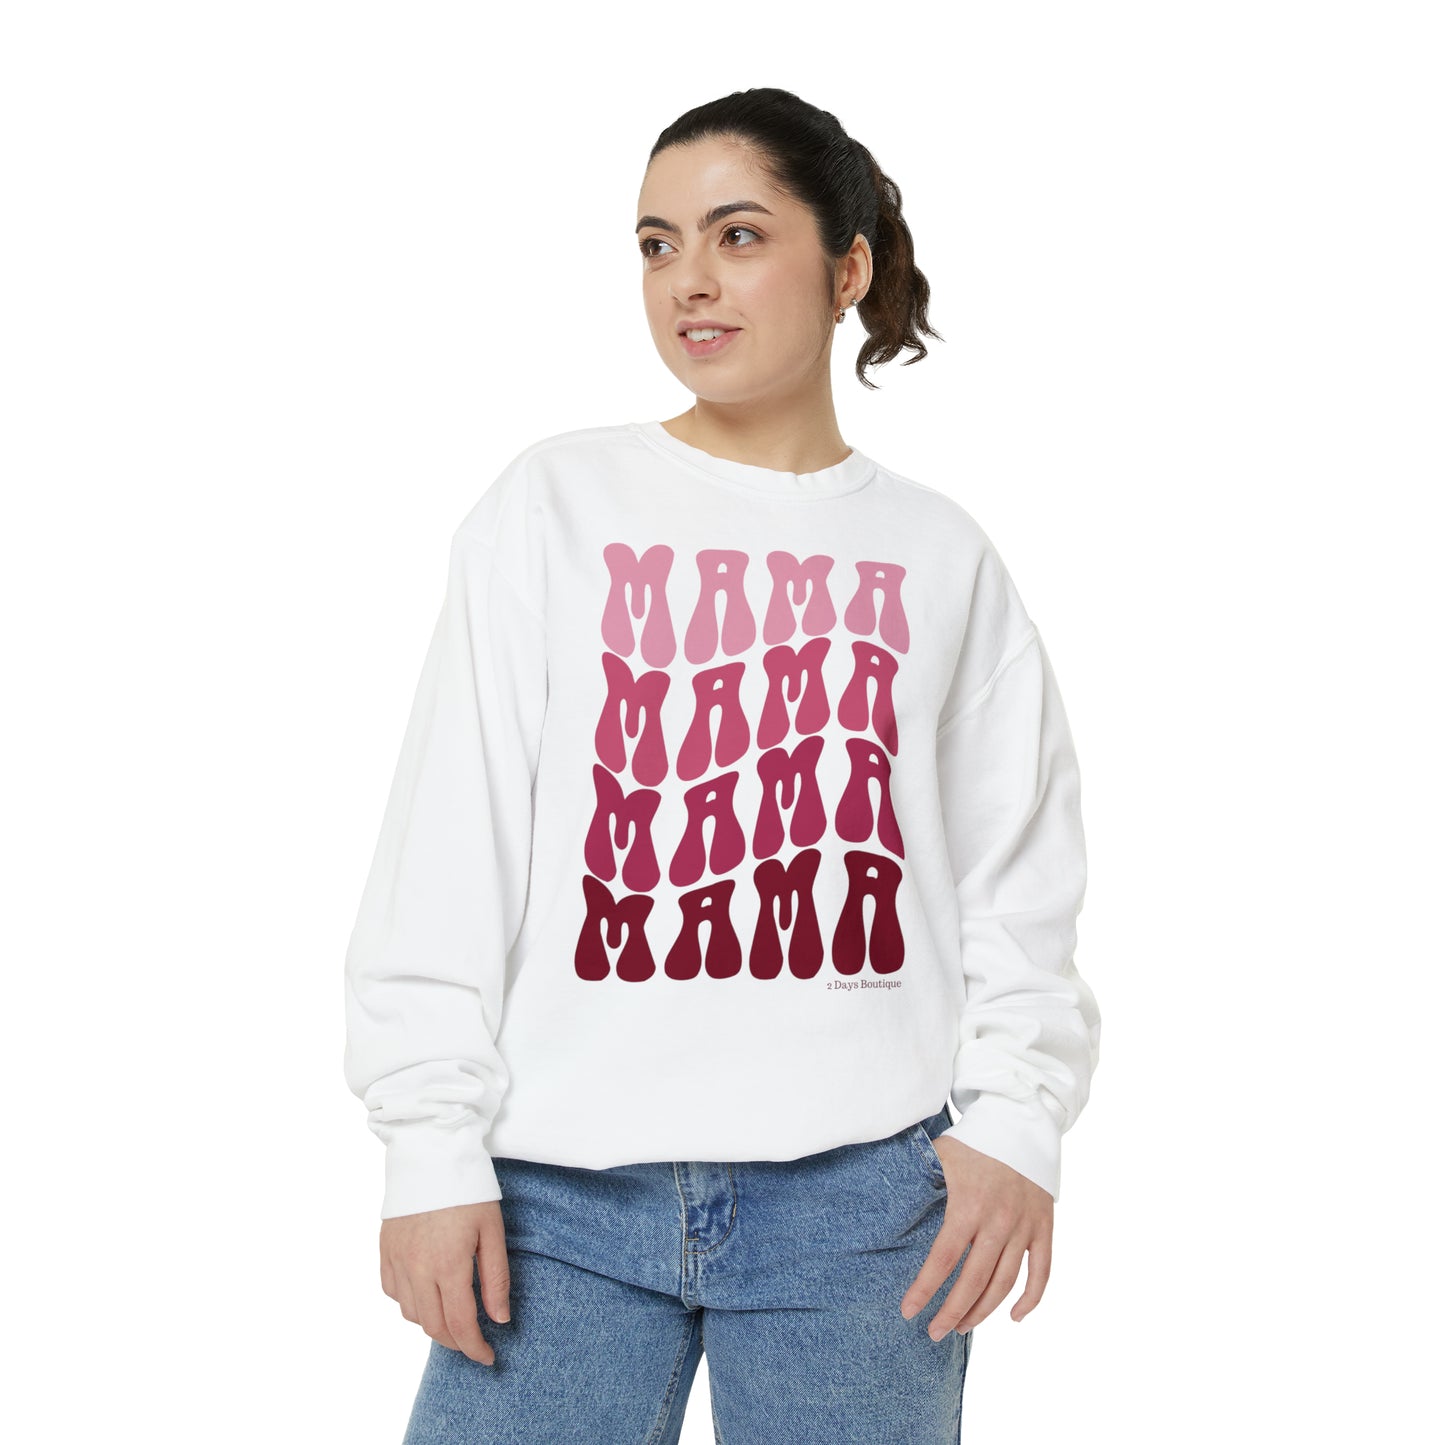 Groovy Mama Crewneck- ONLINE ONLY